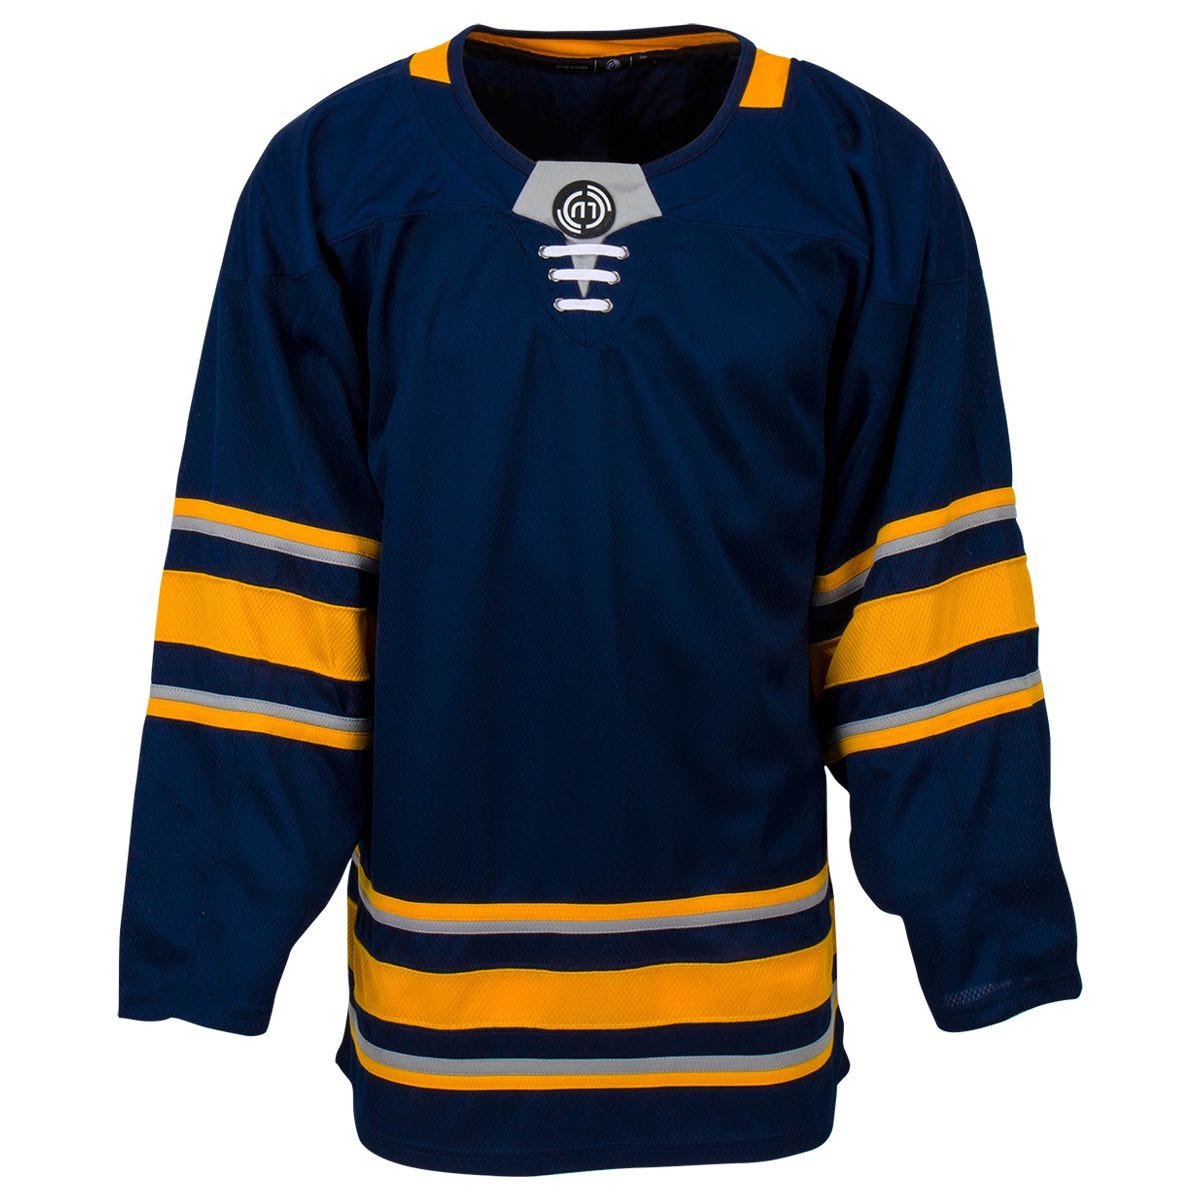 Buffalo Sabres clutch player jersey